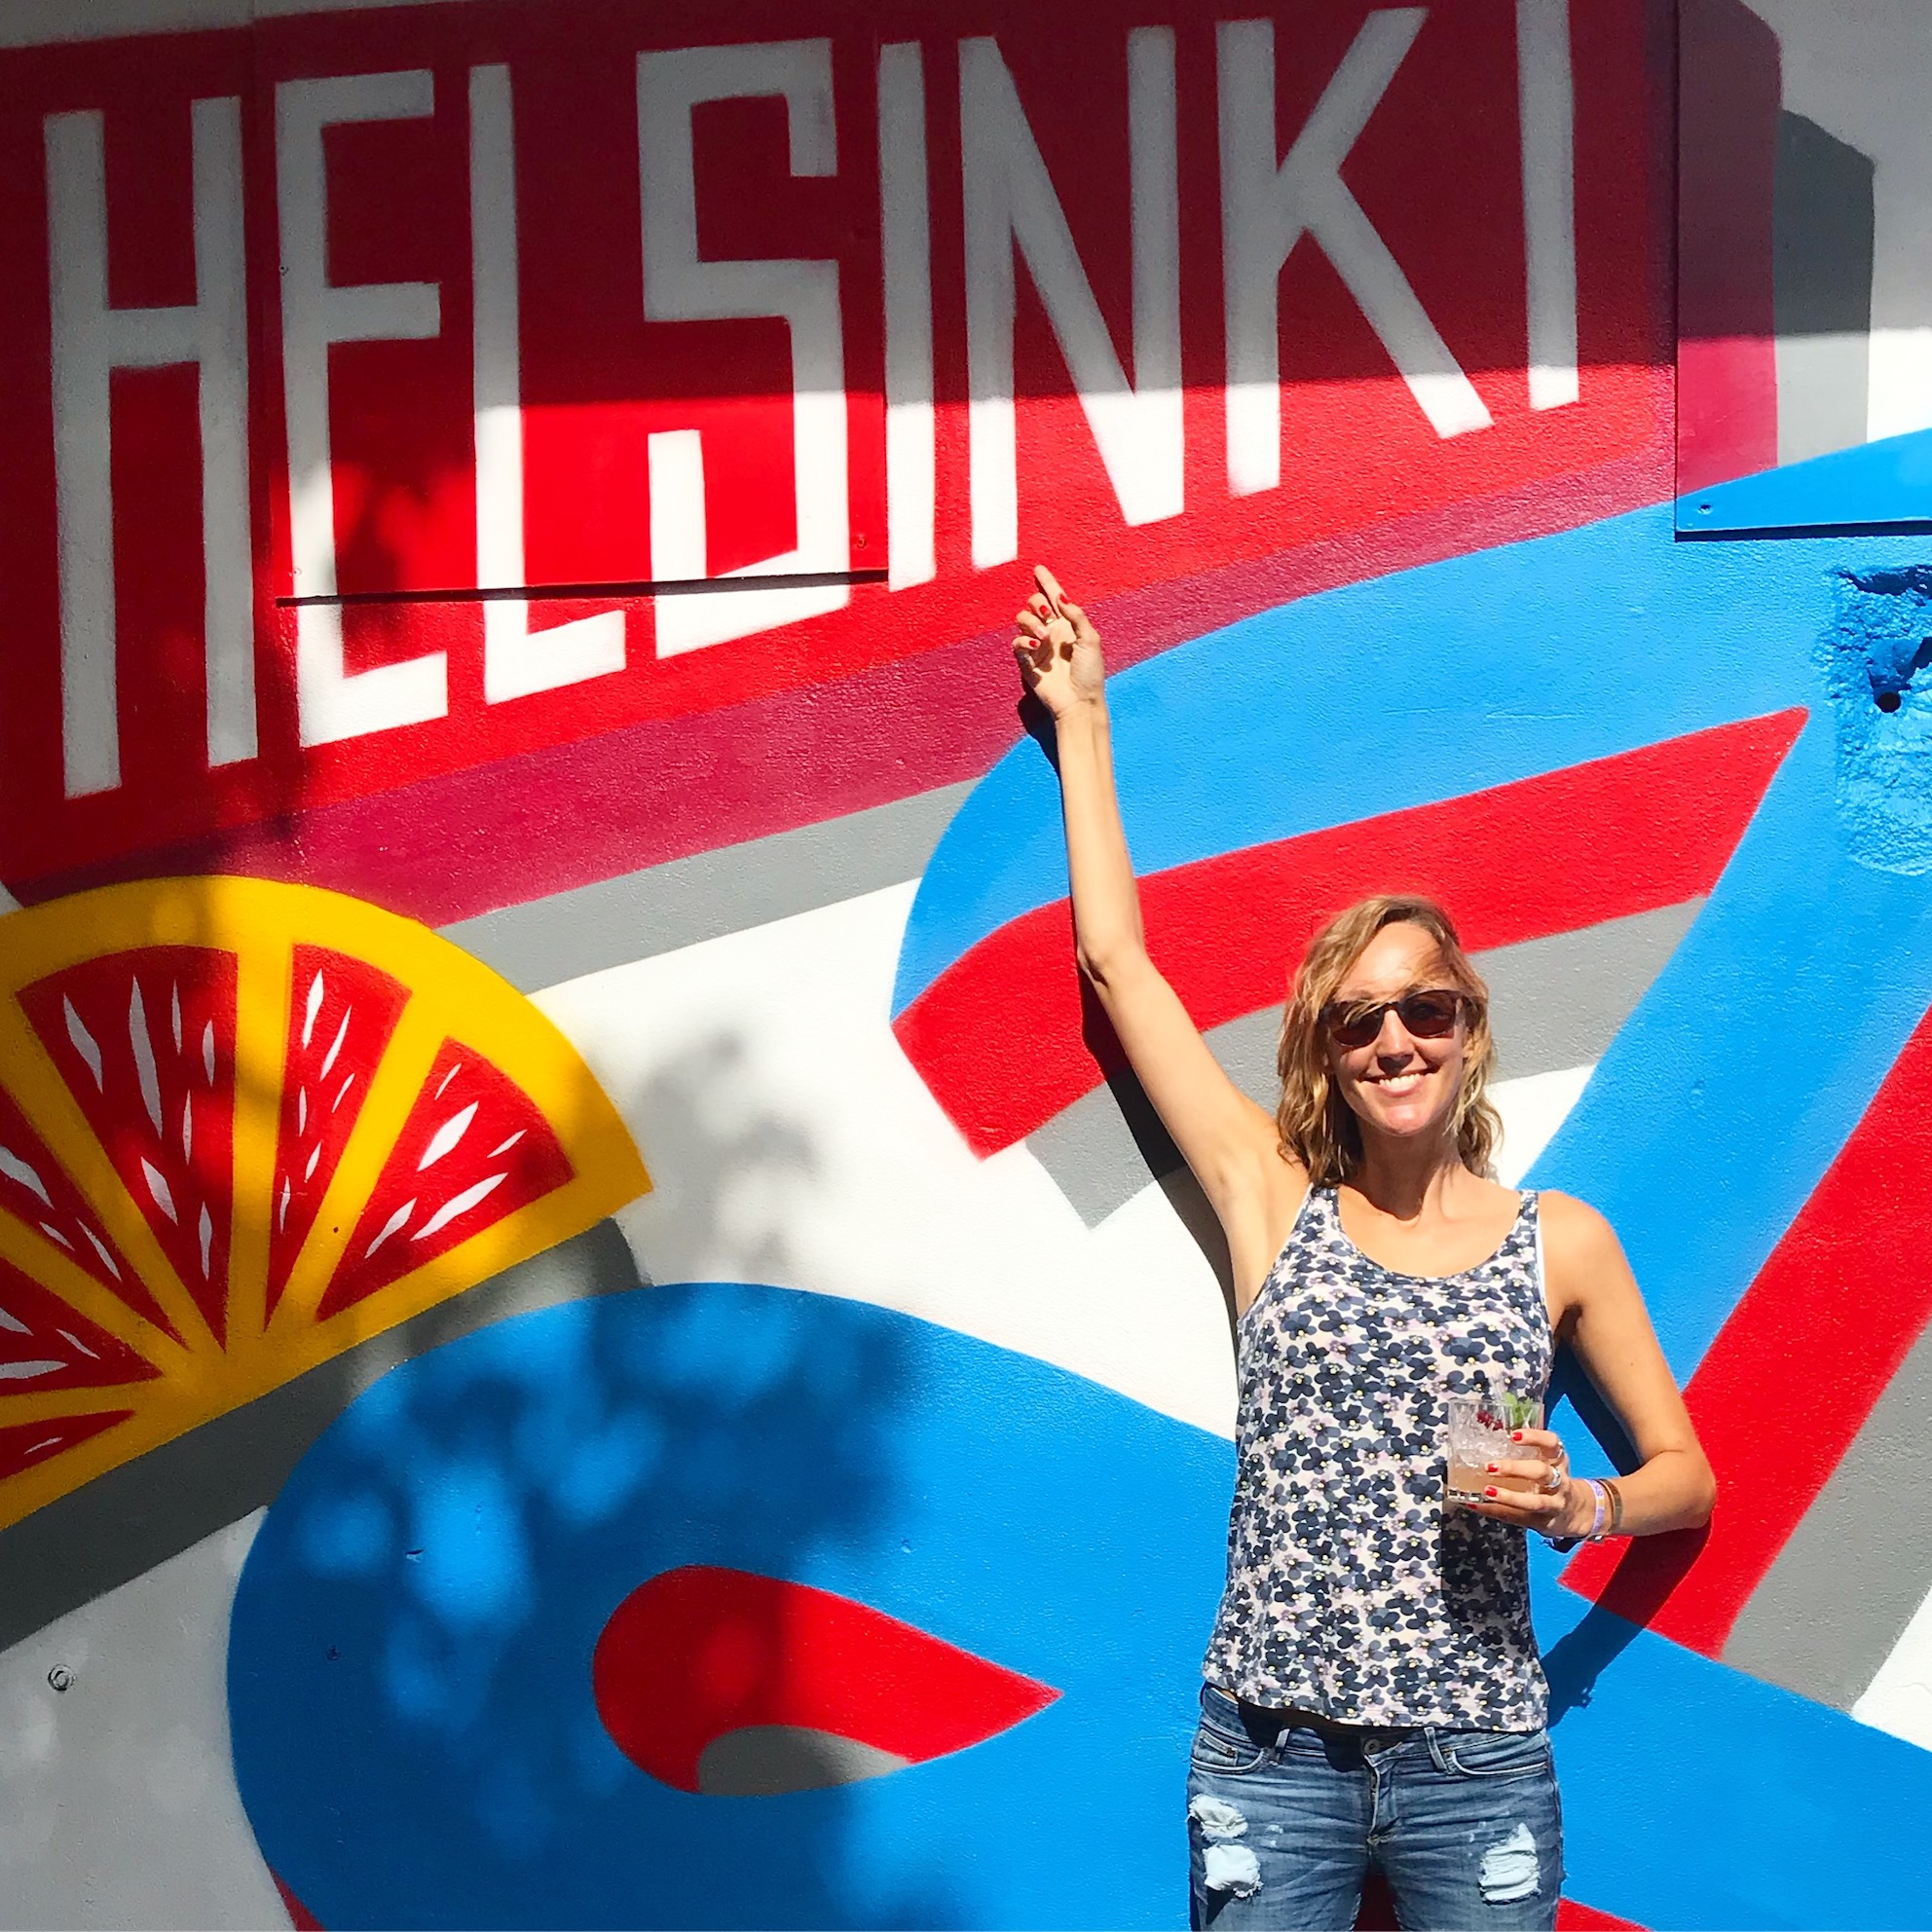 Hayley standing in front of a painted wall that says 'Helsinki' 